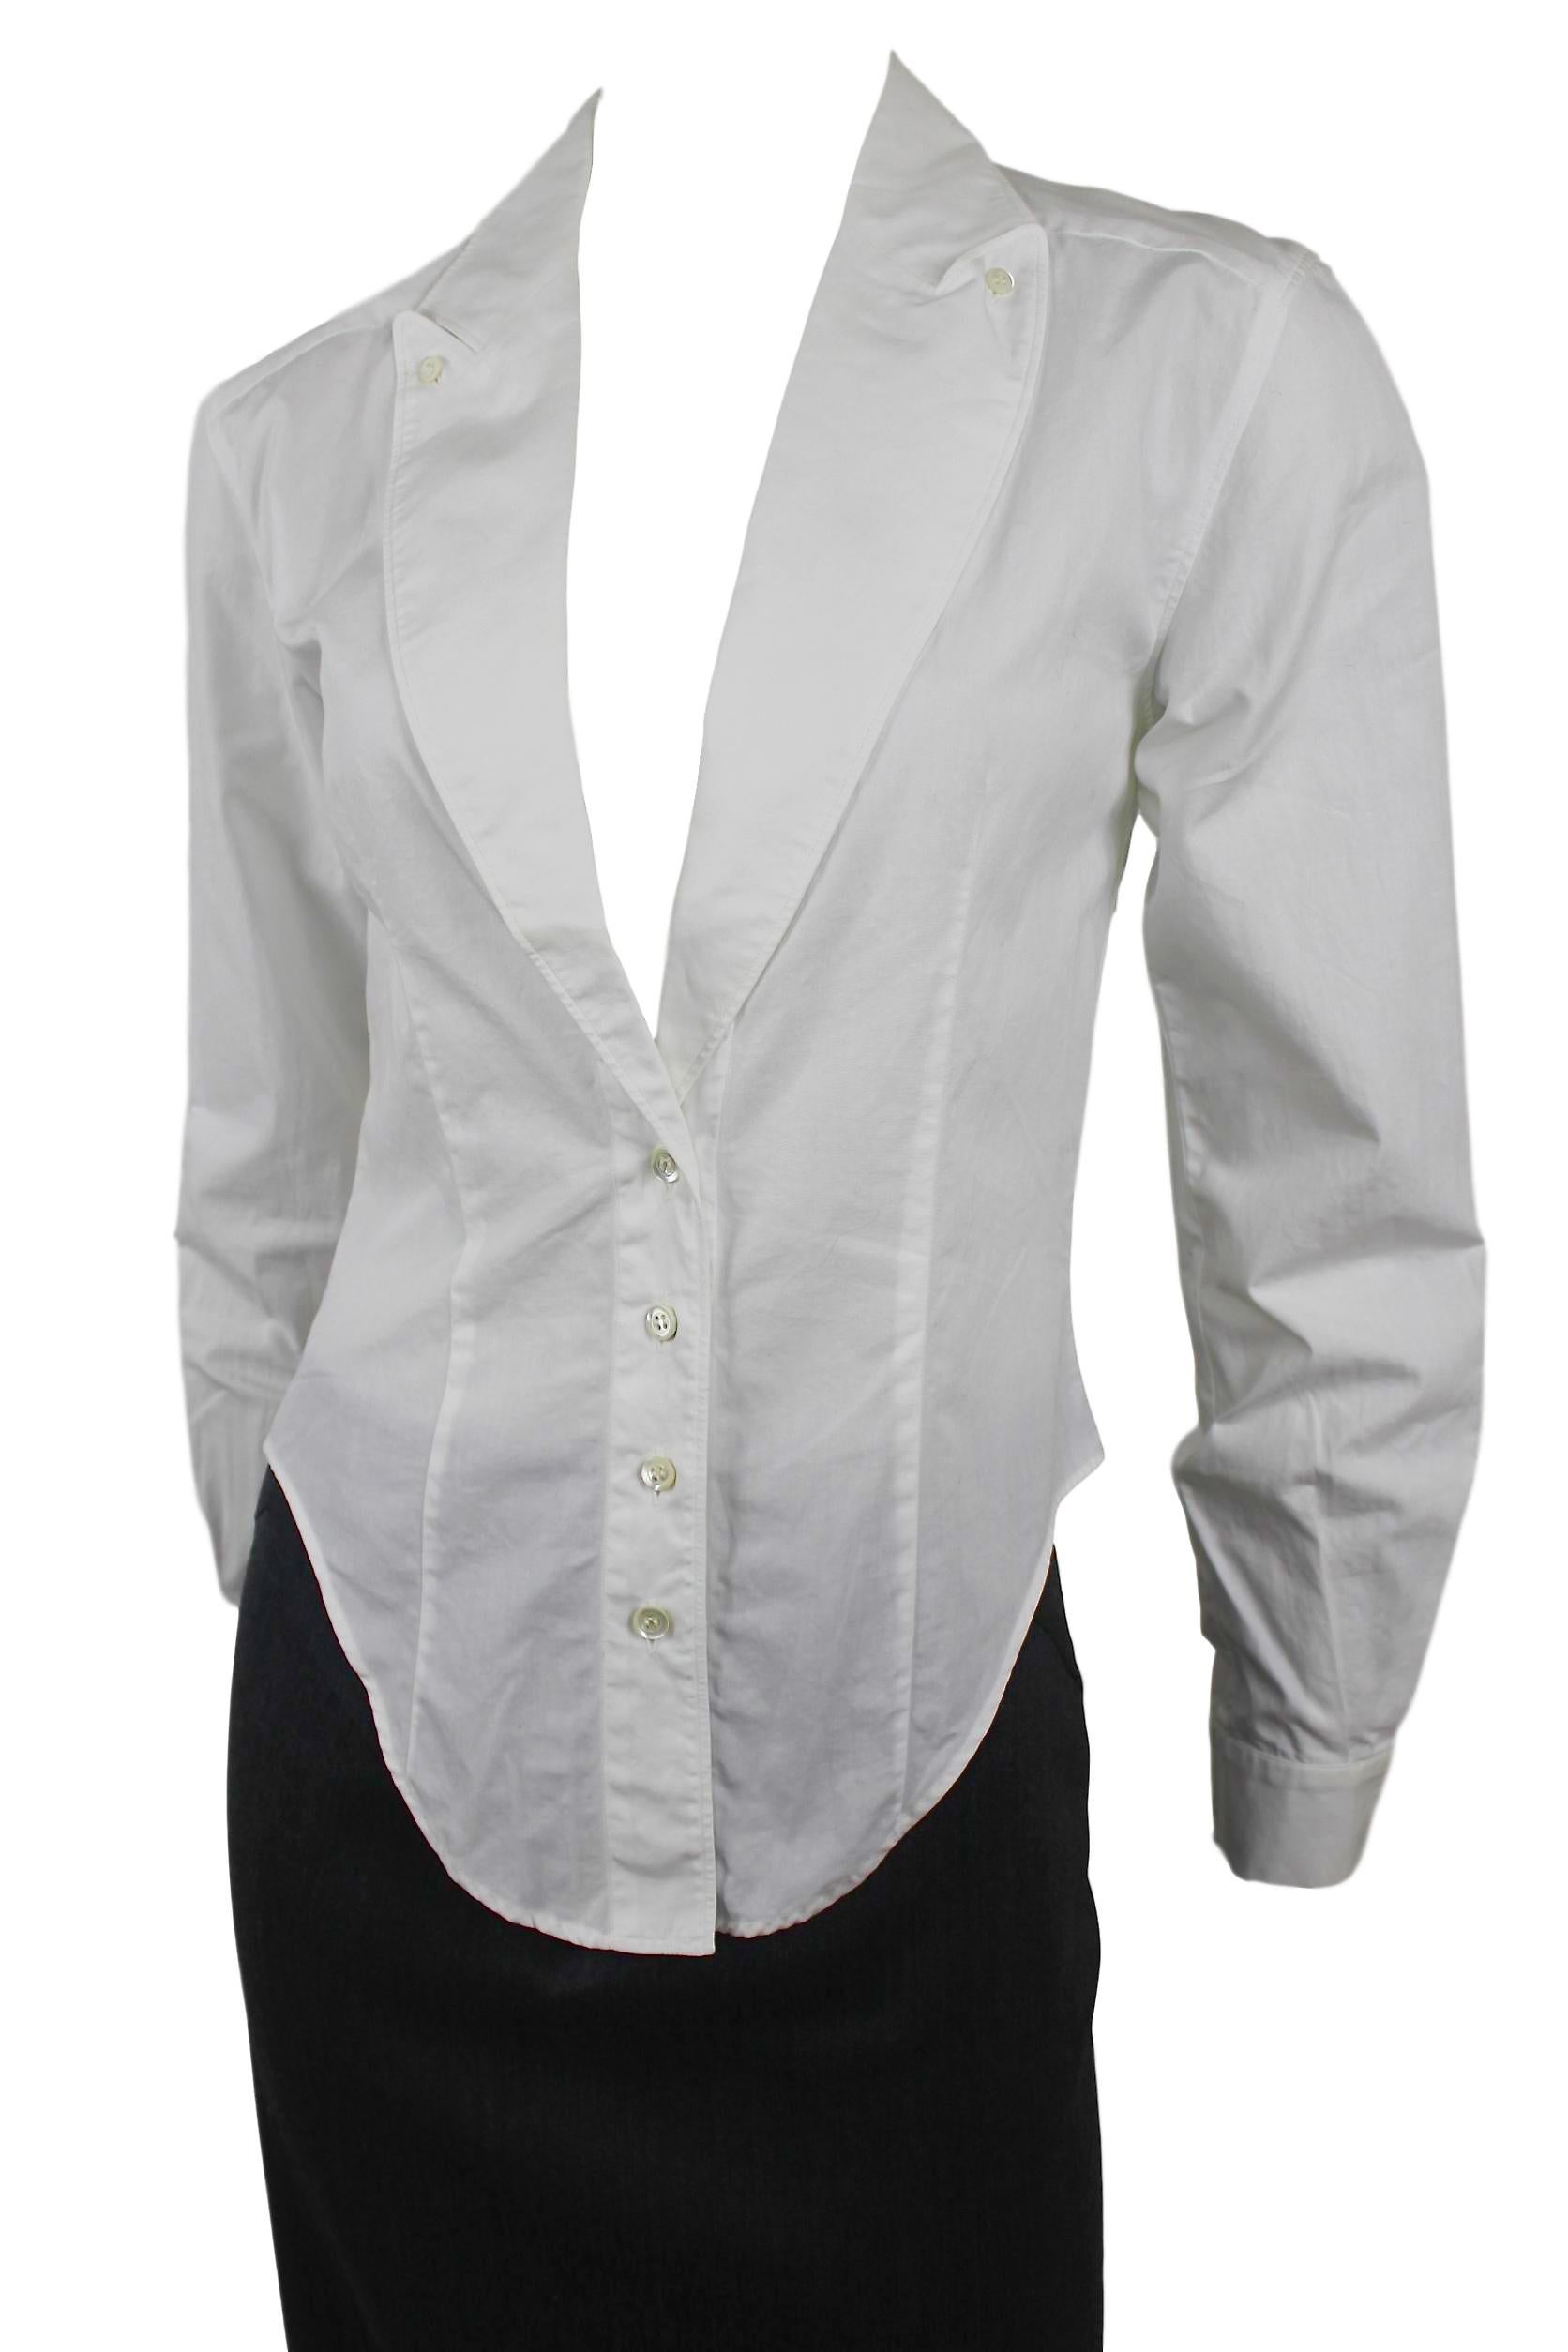 Alexander McQueen
Early Collection
Fitted Blouse with Lapels
Labelled size 38